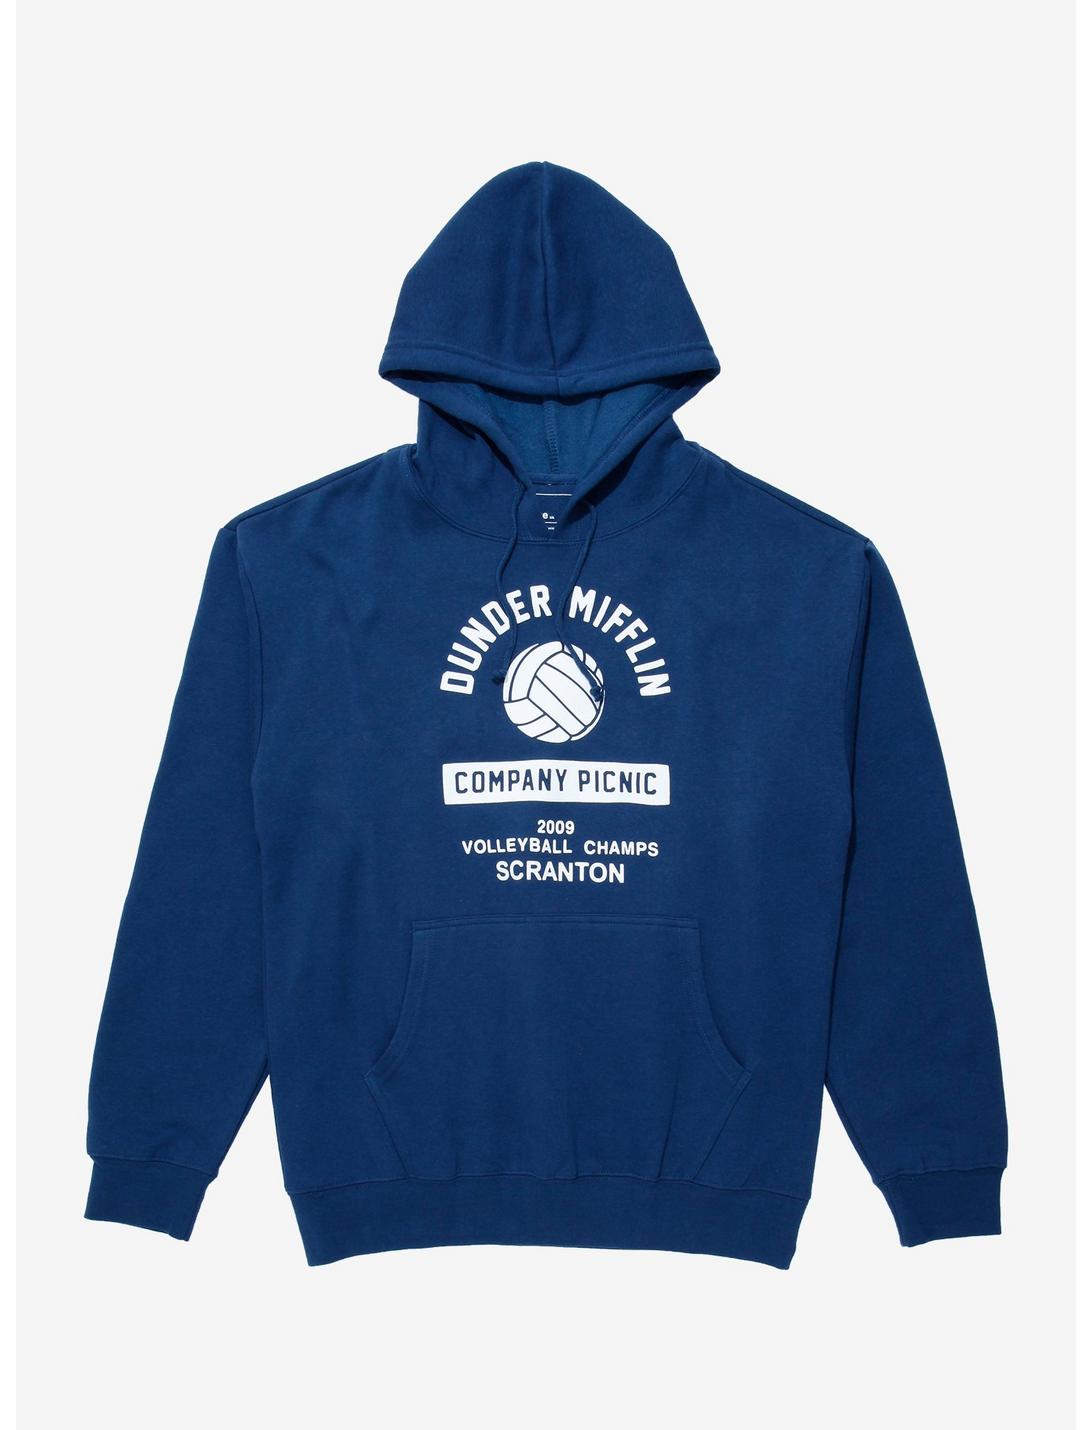 The Office Company Picnic Volleyball Hoodie - BoxLunch Exclusive, NAVY, hi-res